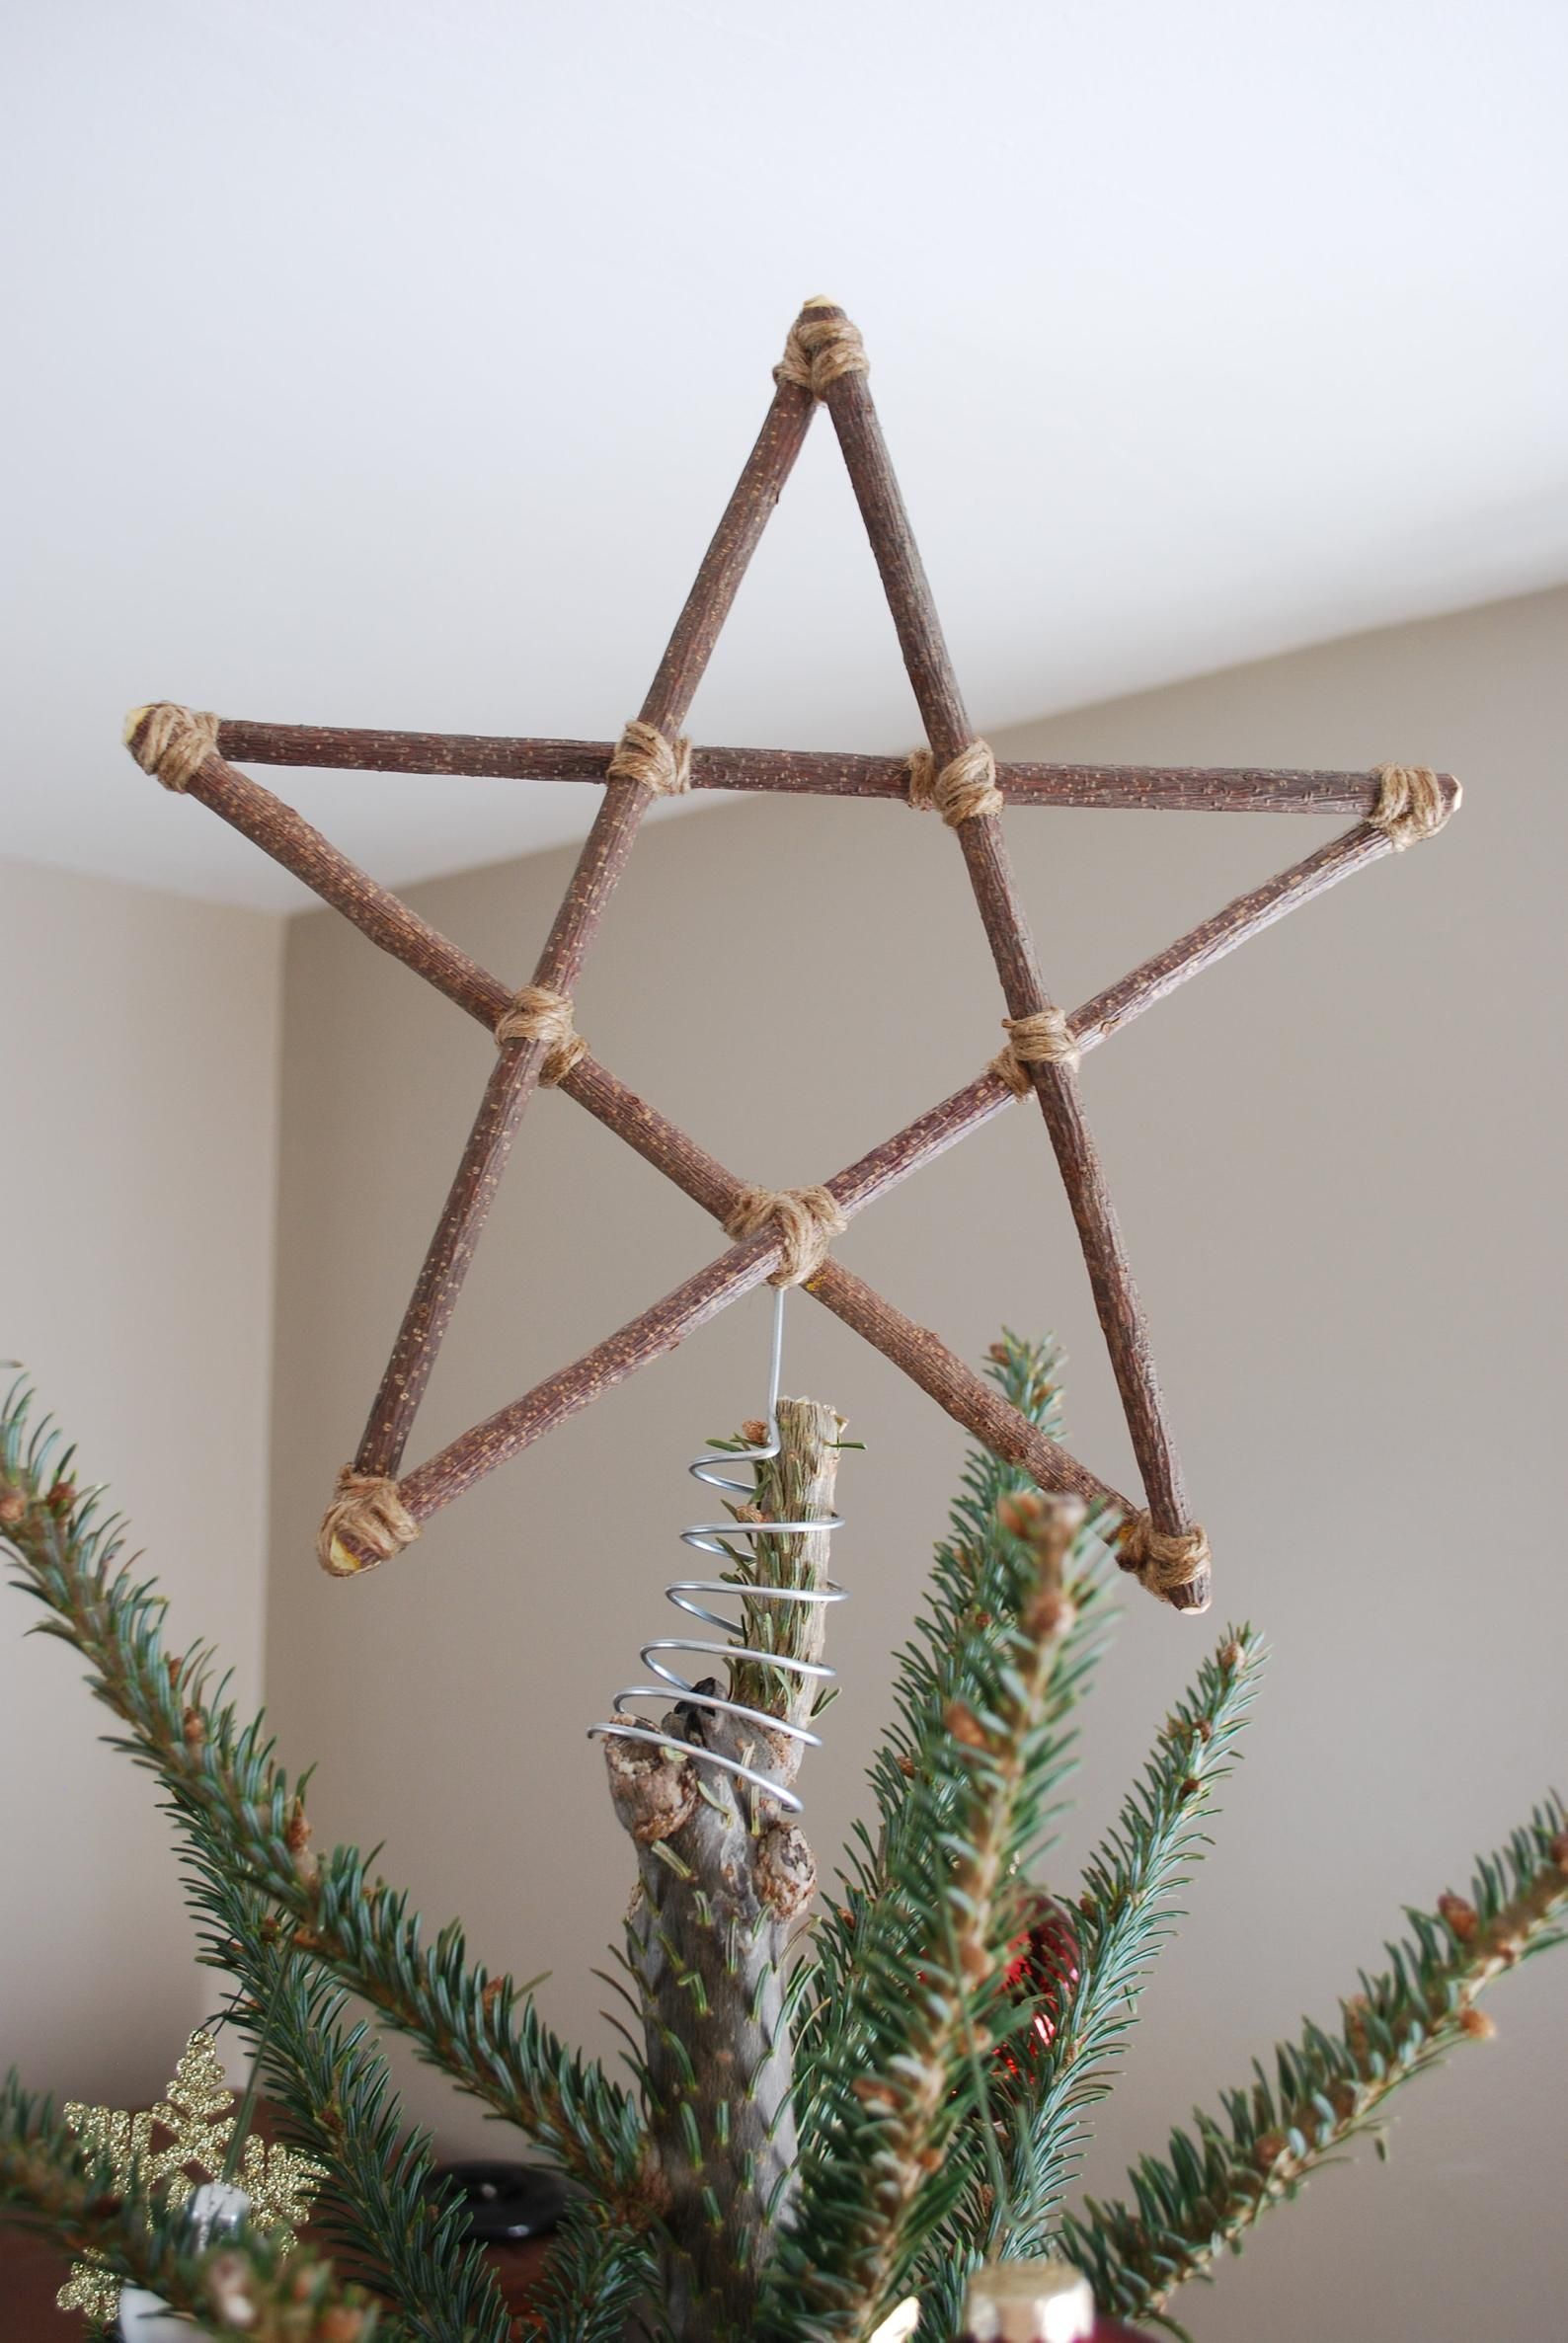 MEDIUM 11 inch Christmas Tree Star Natural Wood and Twine / Christmas Tree Topper Sticks Branches Primitive Eco Friendly Woodland Decor -   18 christmas tree topper diy star ideas